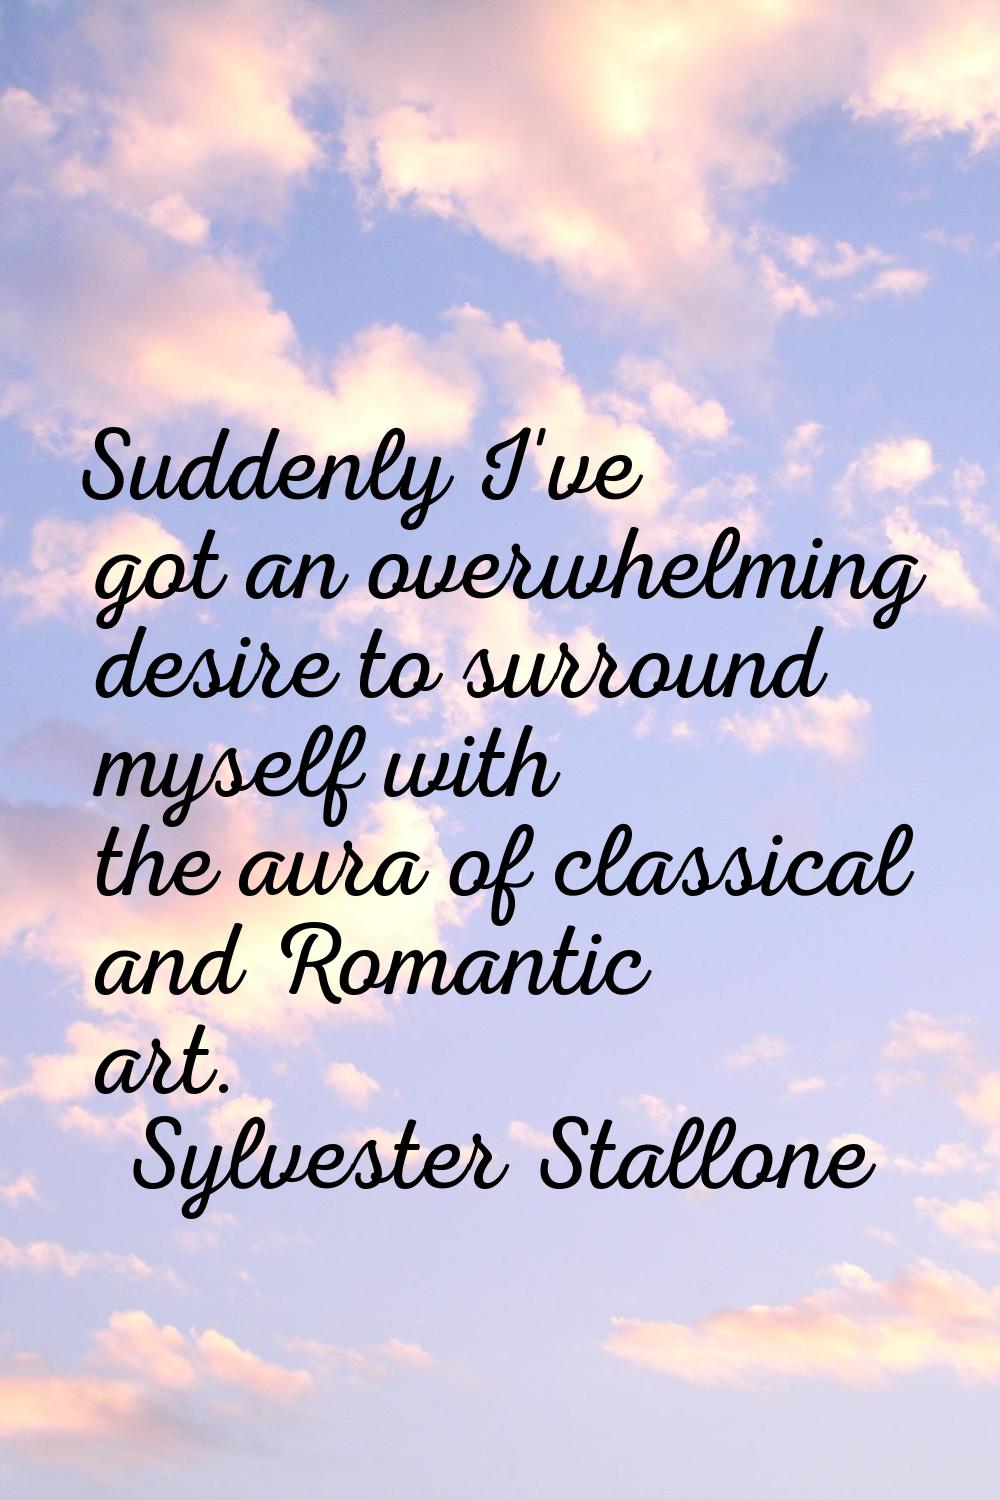 Suddenly I've got an overwhelming desire to surround myself with the aura of classical and Romantic